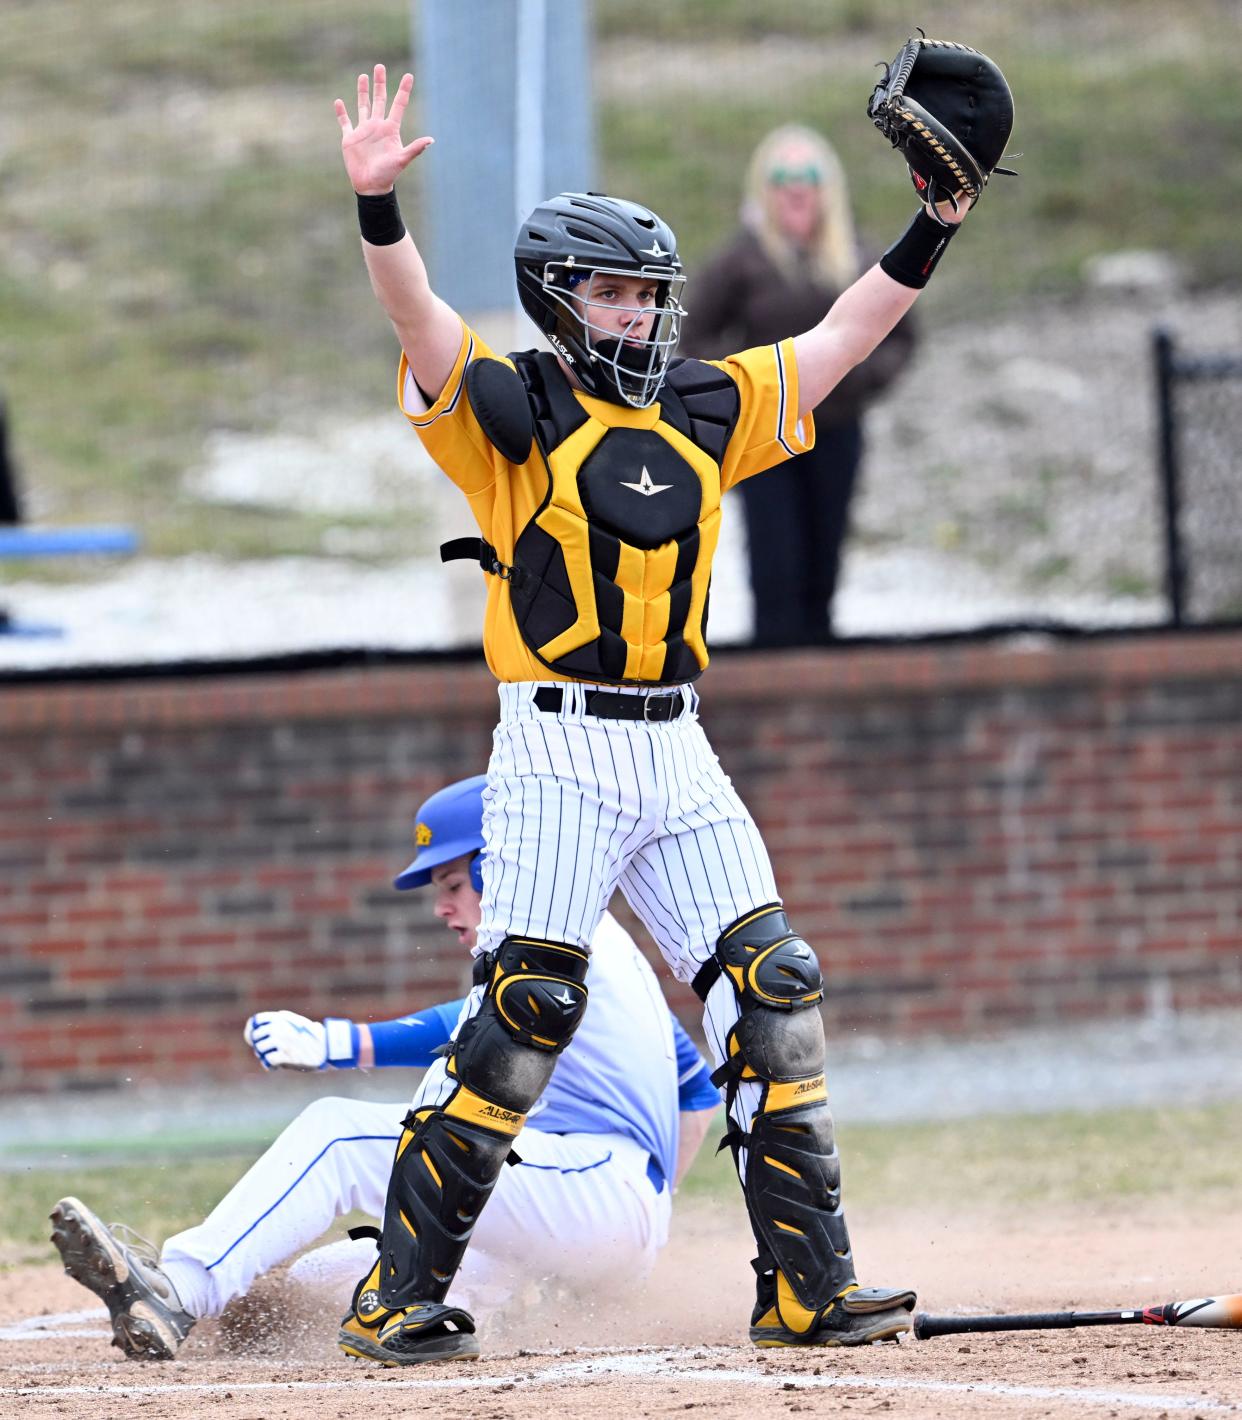 Logan Our of St. John Paul II crosses the plate as Nauset catcher Evan Archer calls off the throw